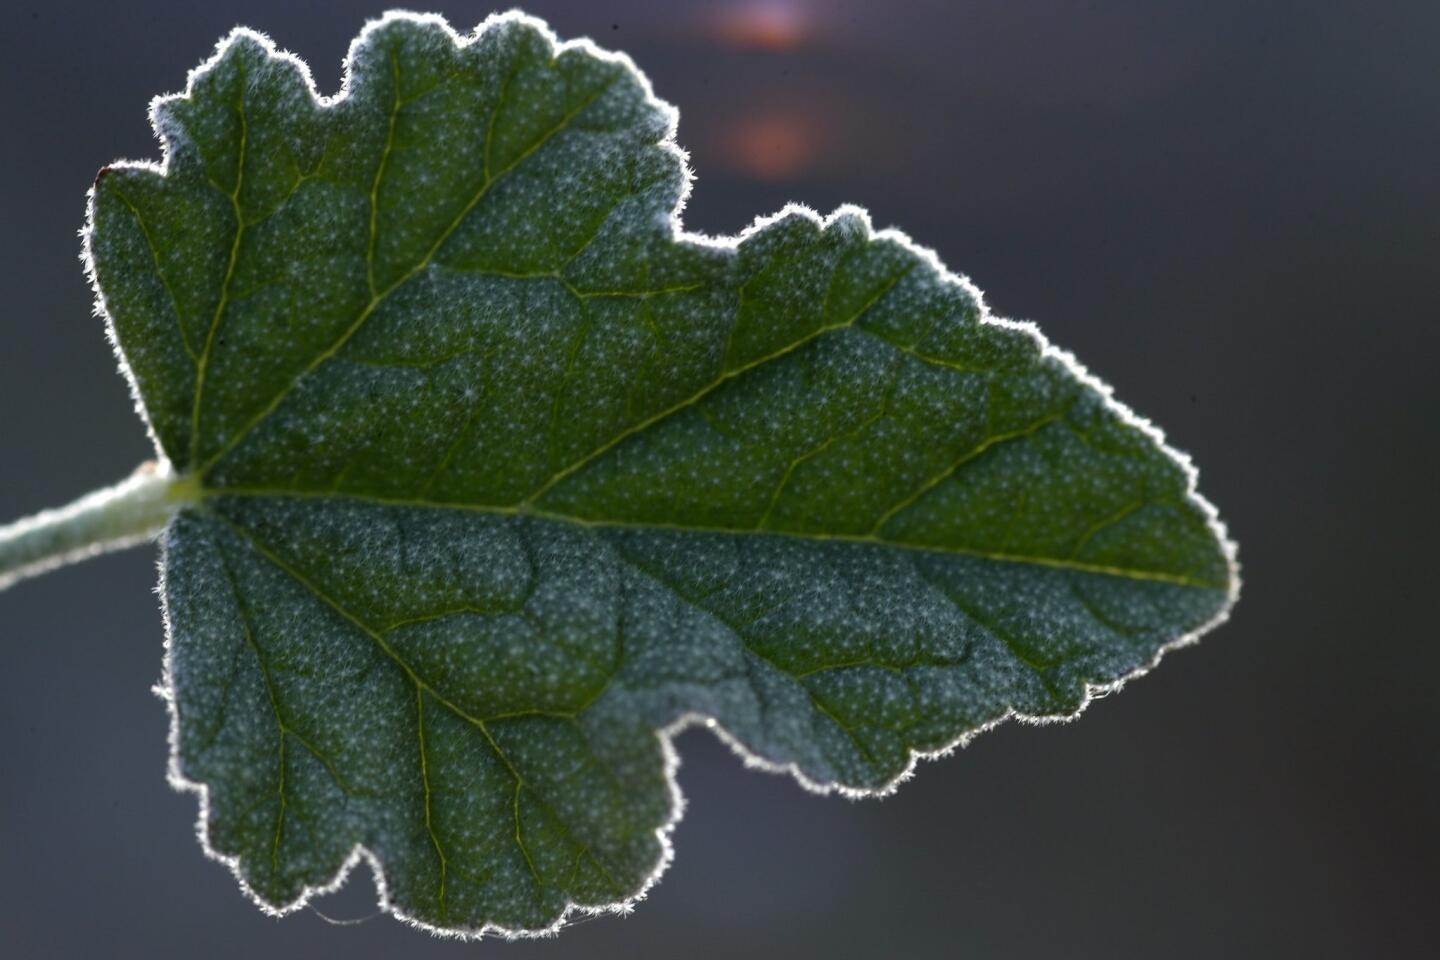 The leaf of the Apricot Mallow (Sphaeralcea ambigua).